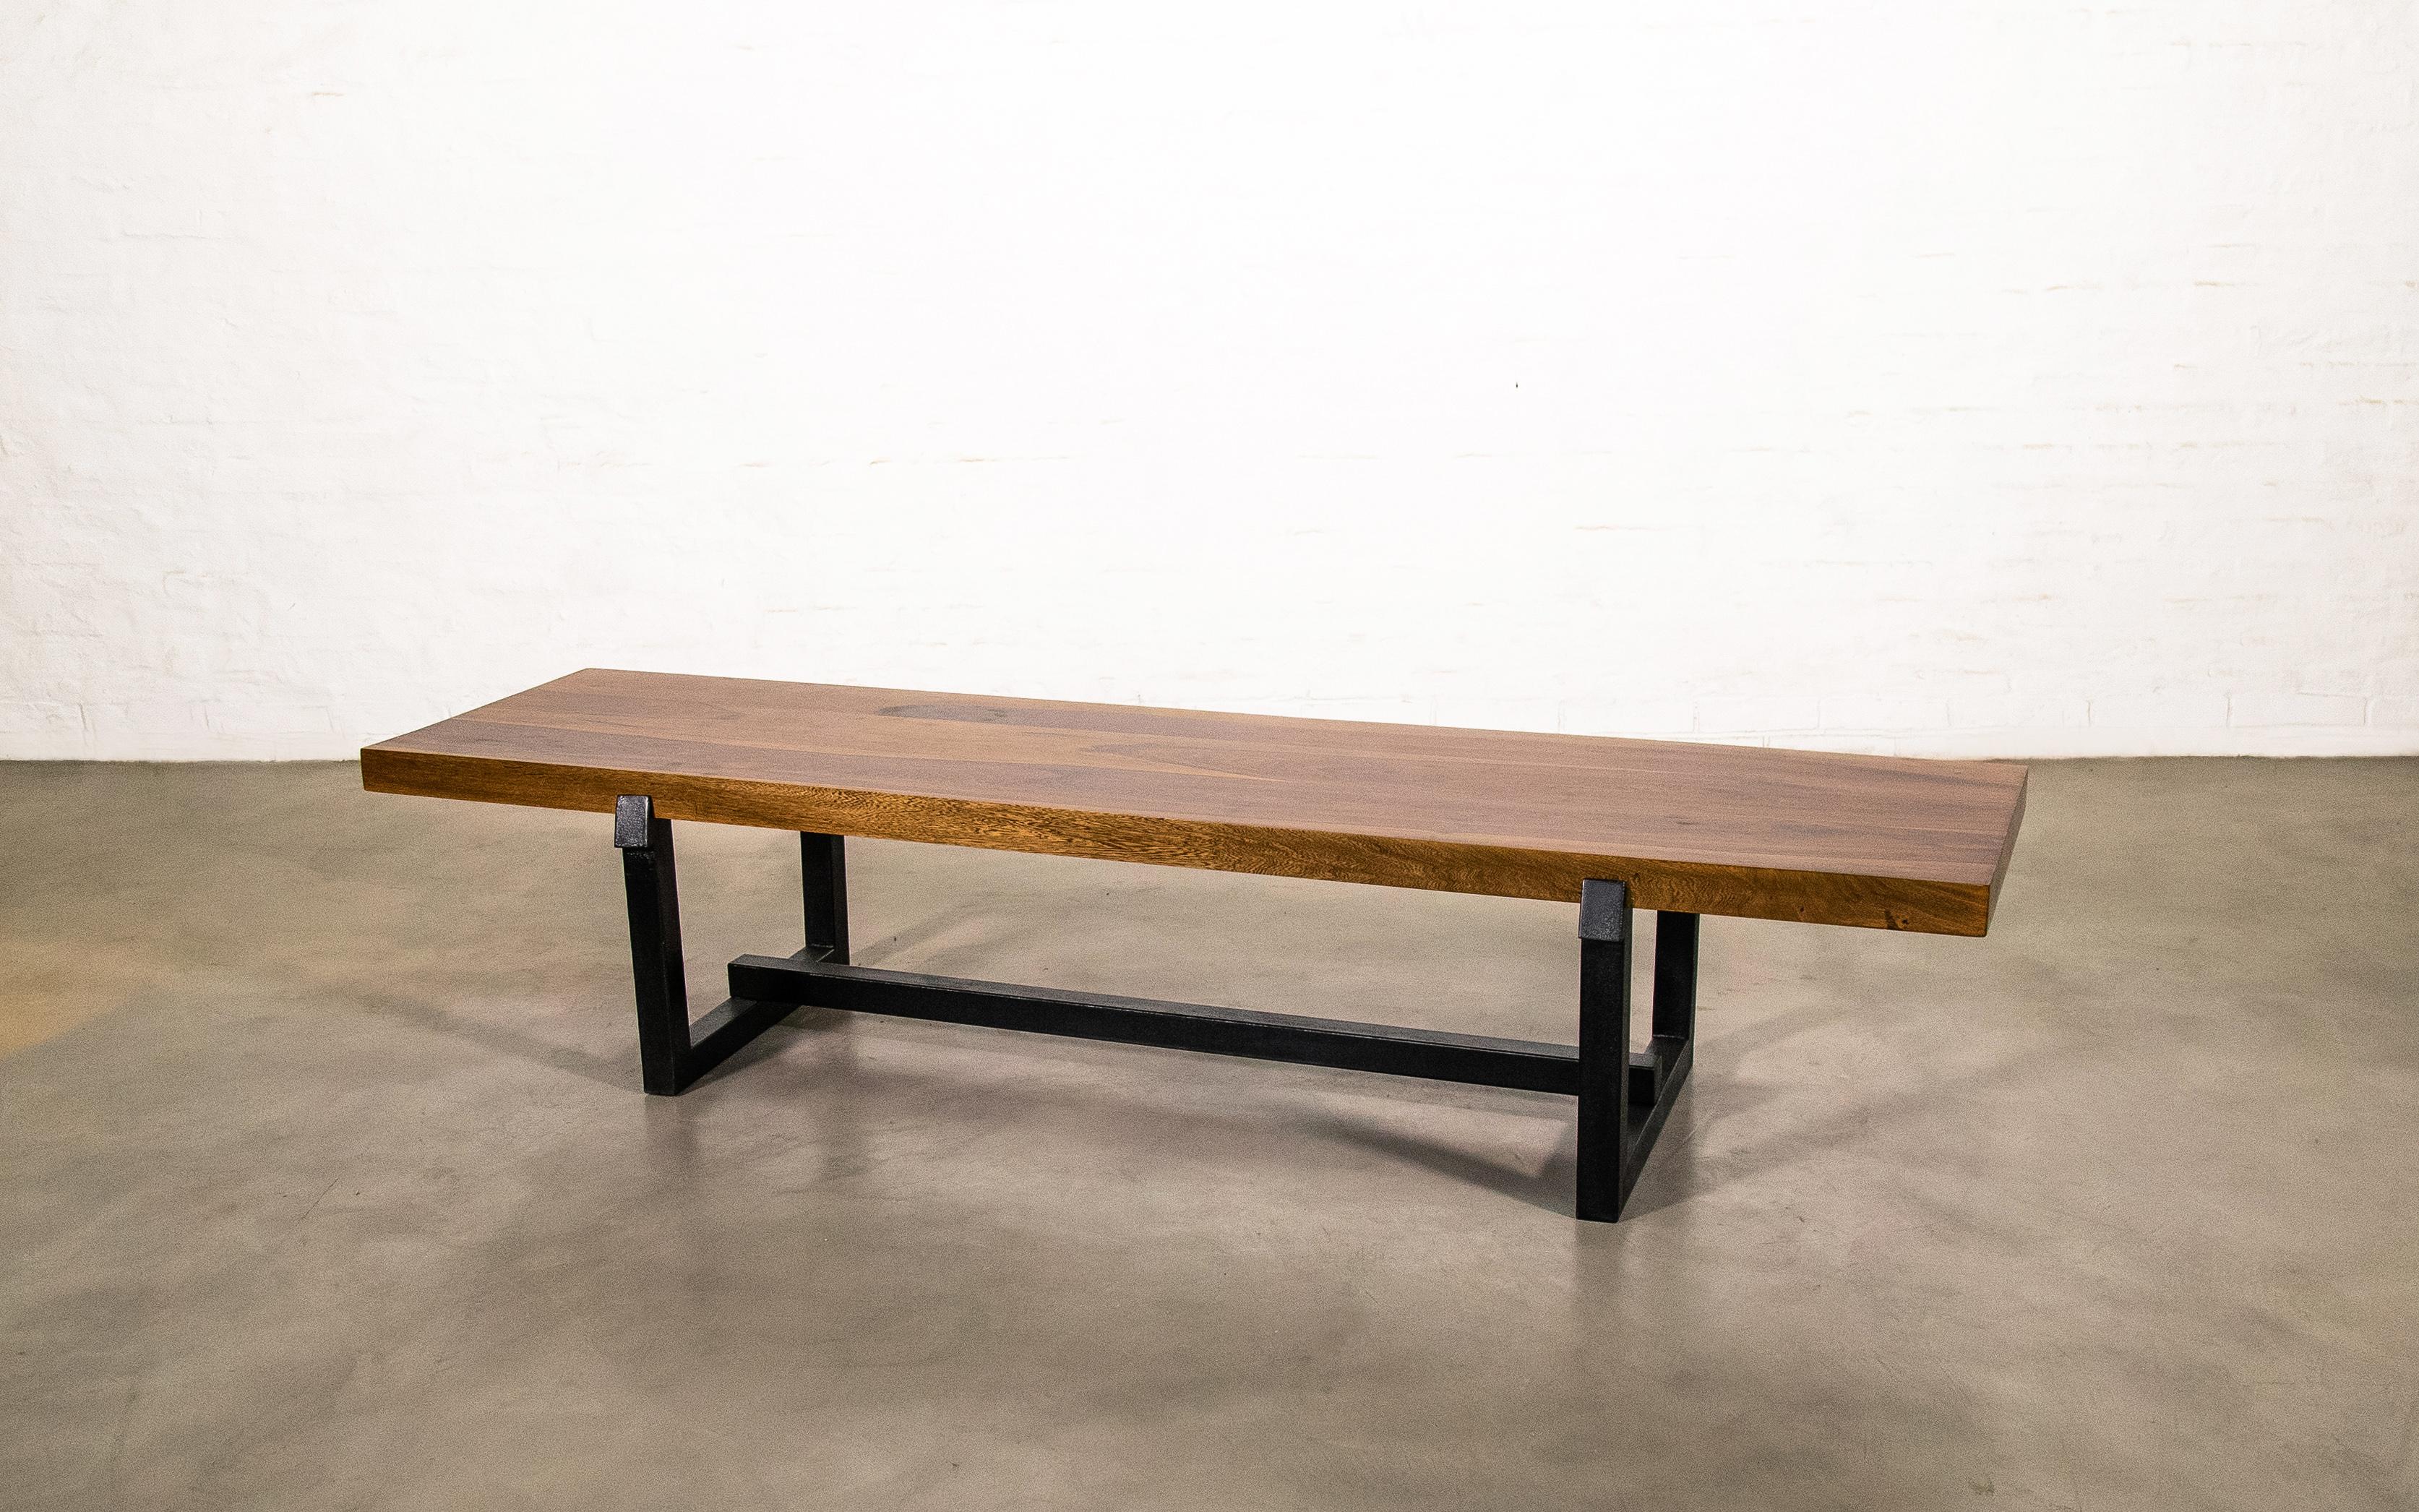 Modern Exotic Wood Bench with Blackened Steel Frame by Costantini, Donato 'In Stock'